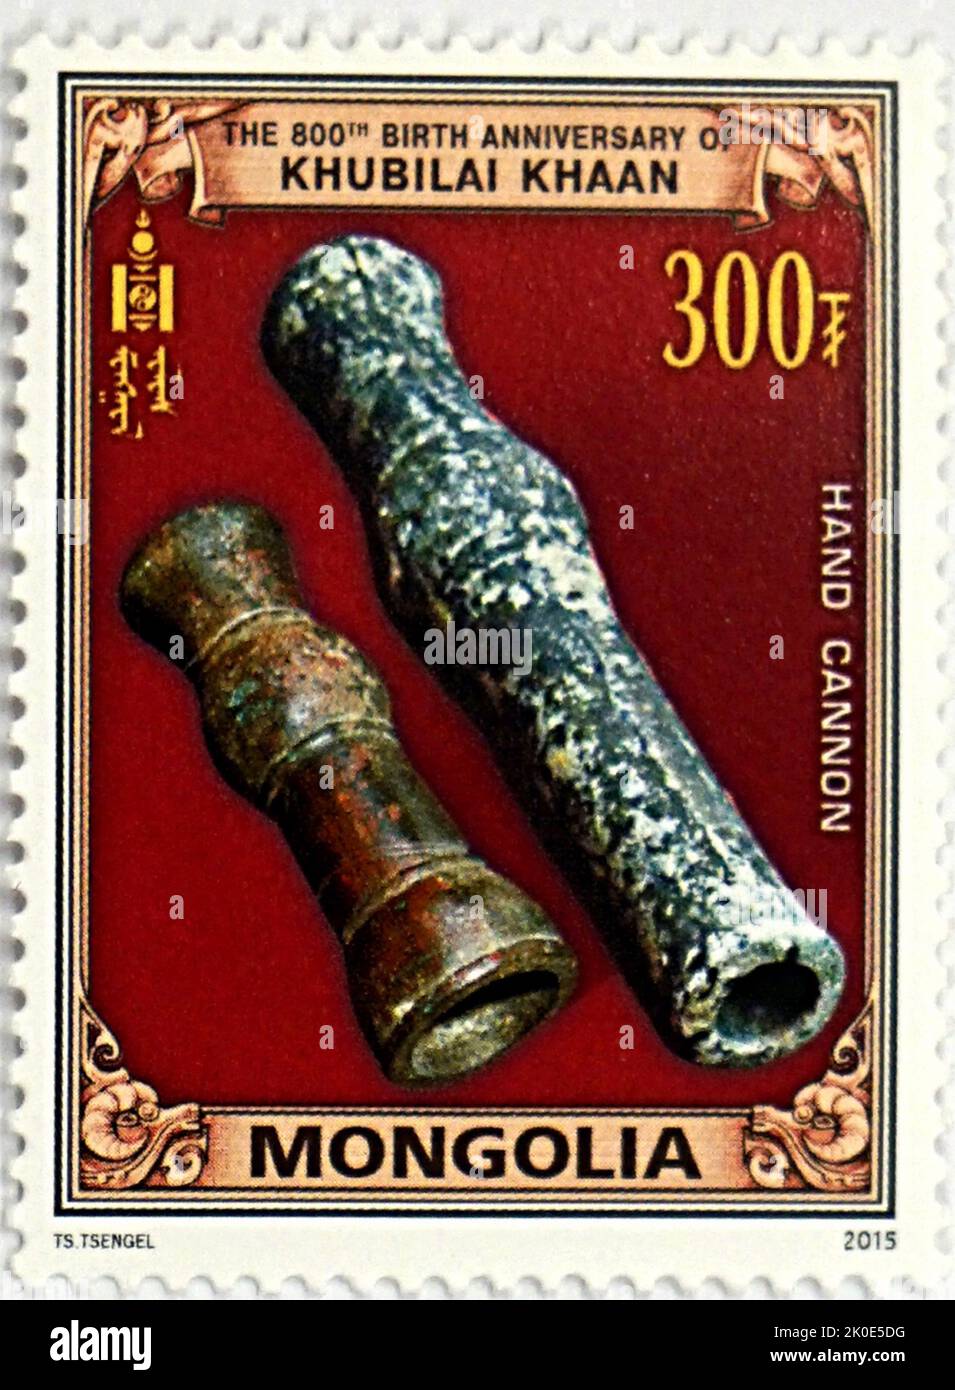 Mongolian stamp celebrating Kublai (1215 - 1294), also known as the Emperor Shizu of Yuan, fifth khagan-emperor of the Mongol Empire, reigning from 1260 to 1294, although after the division of the empire this was a nominal position. He also founded the Yuan dynasty of China in 1271, and ruled as the first Yuan emperor until his death in 1294. Stock Photo